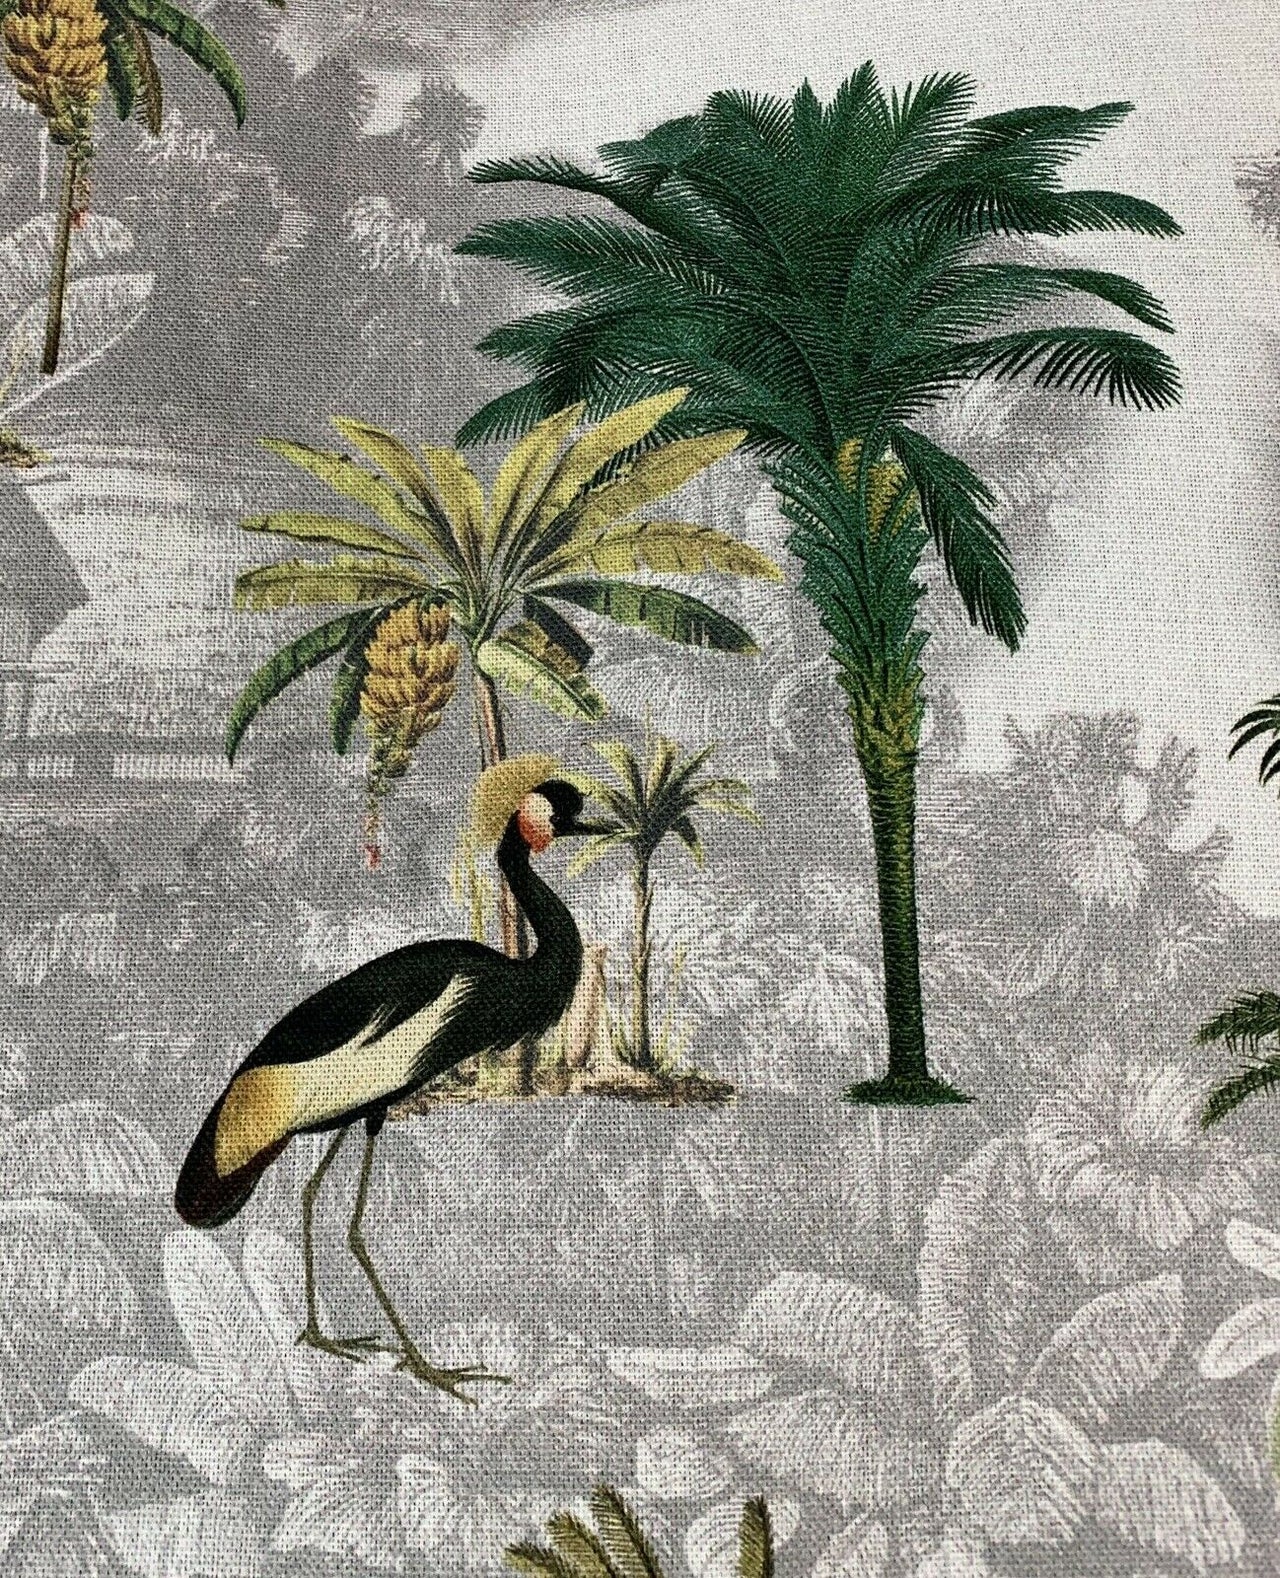 Safari Animals fabric by the meter Grey Cotton Sewing Material Green Palm Tree Elephant Zebra Panther Flamingo Pattern Textile for cushions curtains blinds